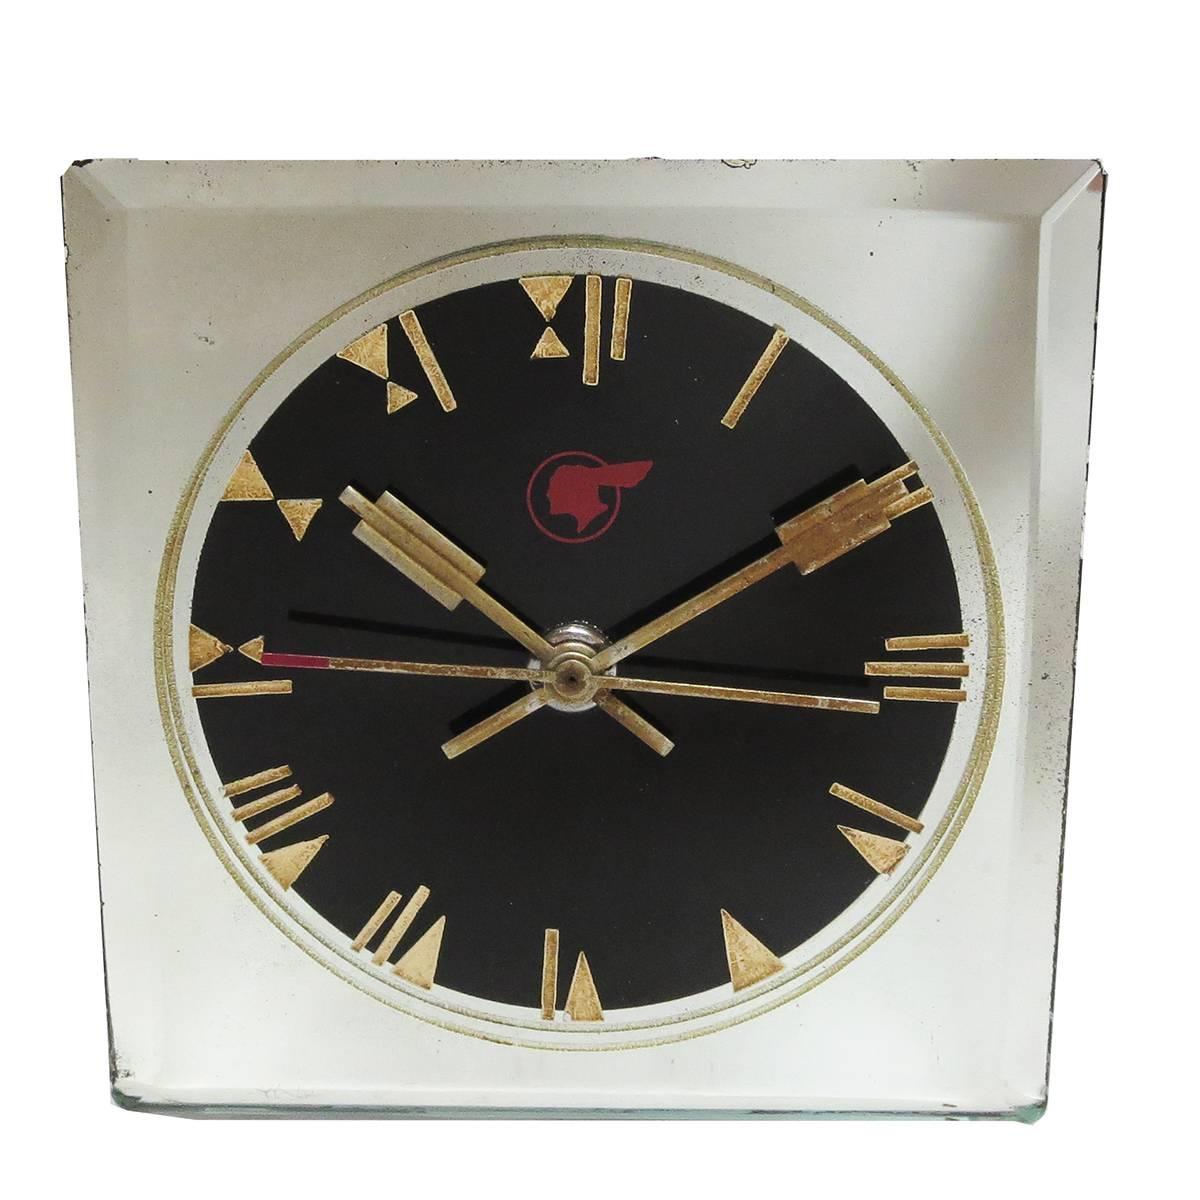 This fabulous clock was made in very limited production for executives of Pontiac Motors. The 1930s mirrored clock was made by Crystal Bent Fyrart clocks, with a movement by the Waltham Watch Company. Made from a single piece of glass, the edges are